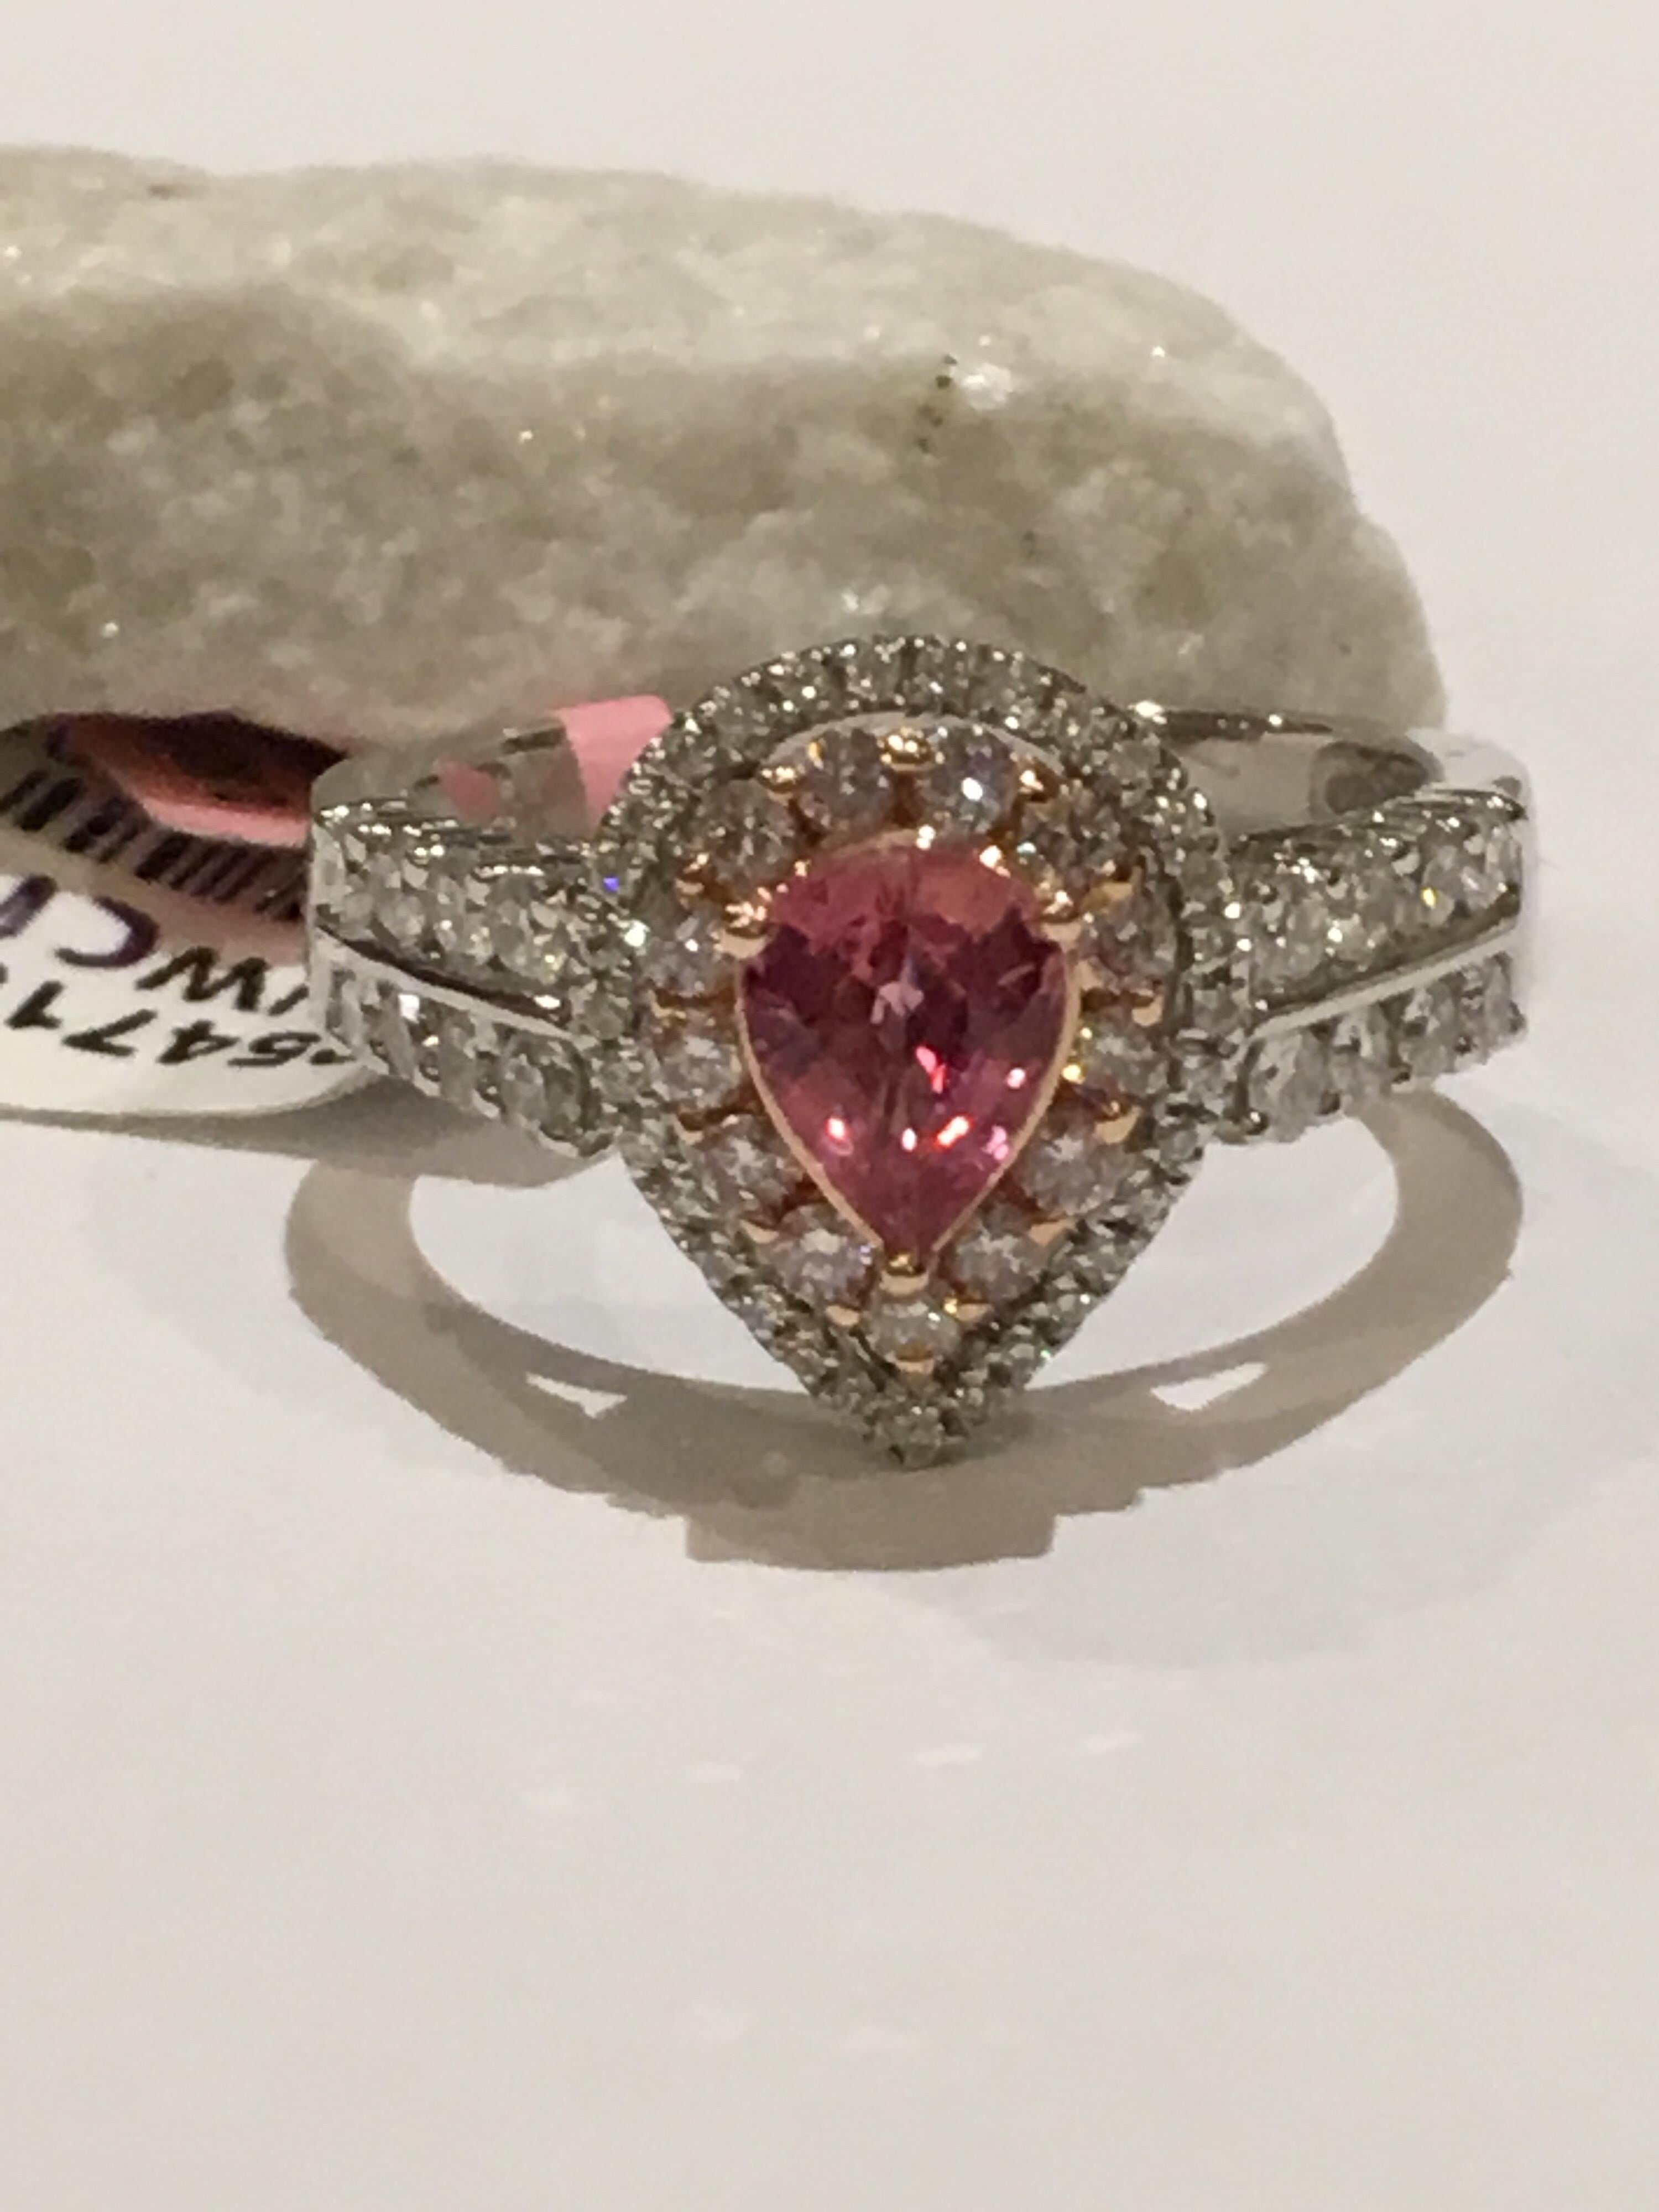 Natural Padparadscha Sapphire set in 14K Two tone Gold.
Padaparadscha Sapphire weigh 0.80 Carat and 0.53 Carat White Diamonds and and 0.24 Carat Pink Diamonds.
The size of the Ring is 7 and can be resized.